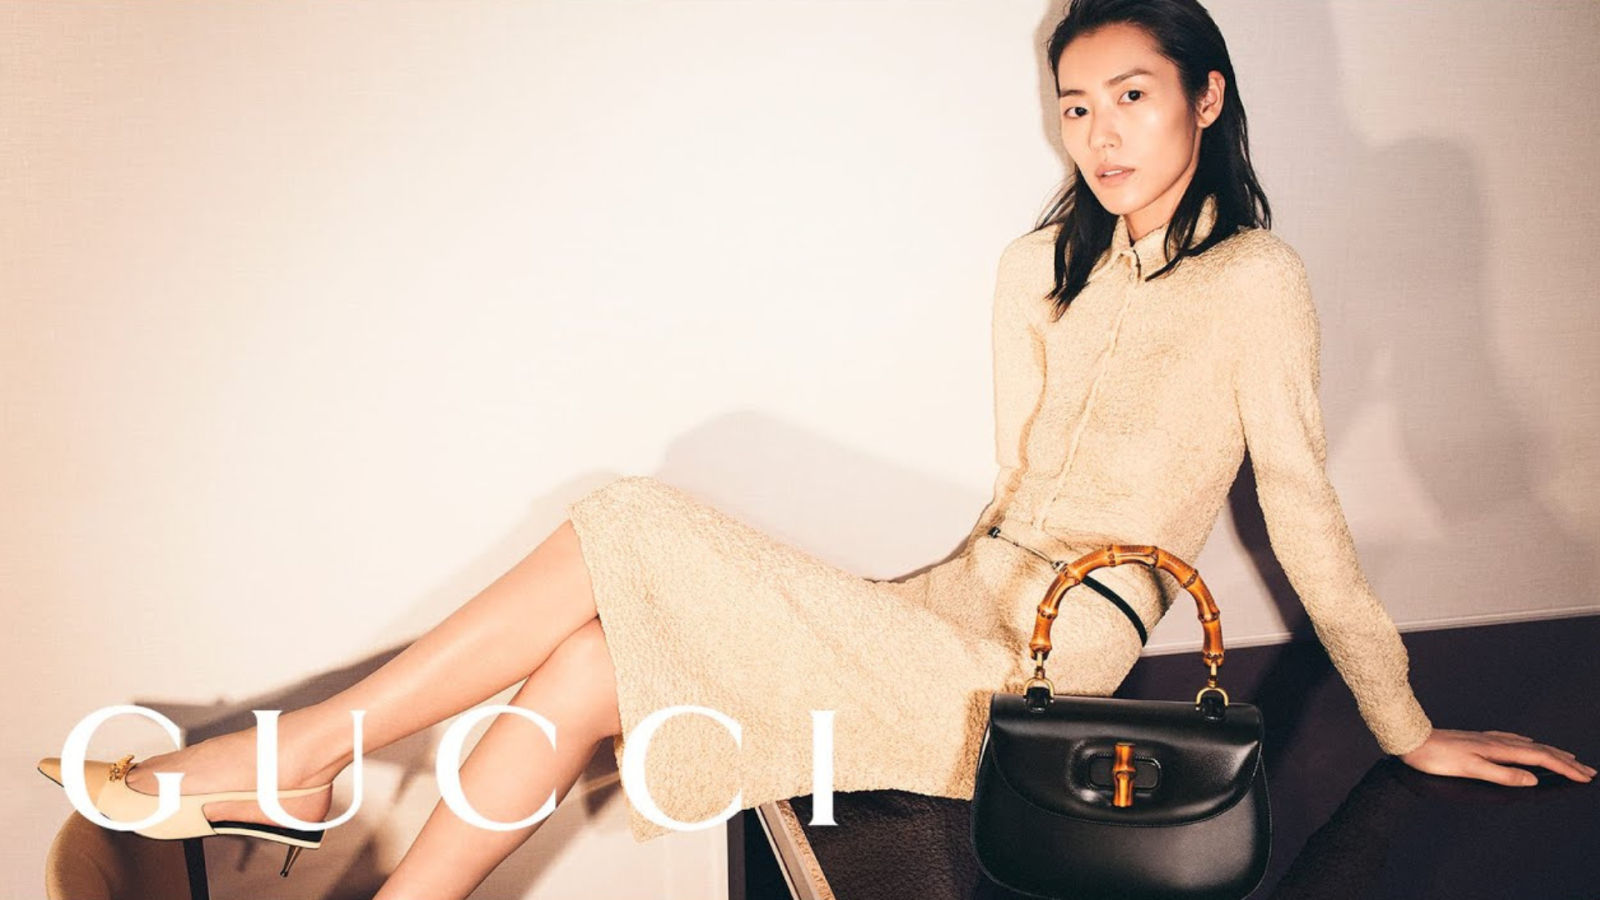 Gucci Bamboo 1947 campaign featuring Liu Wen: A timeless icon